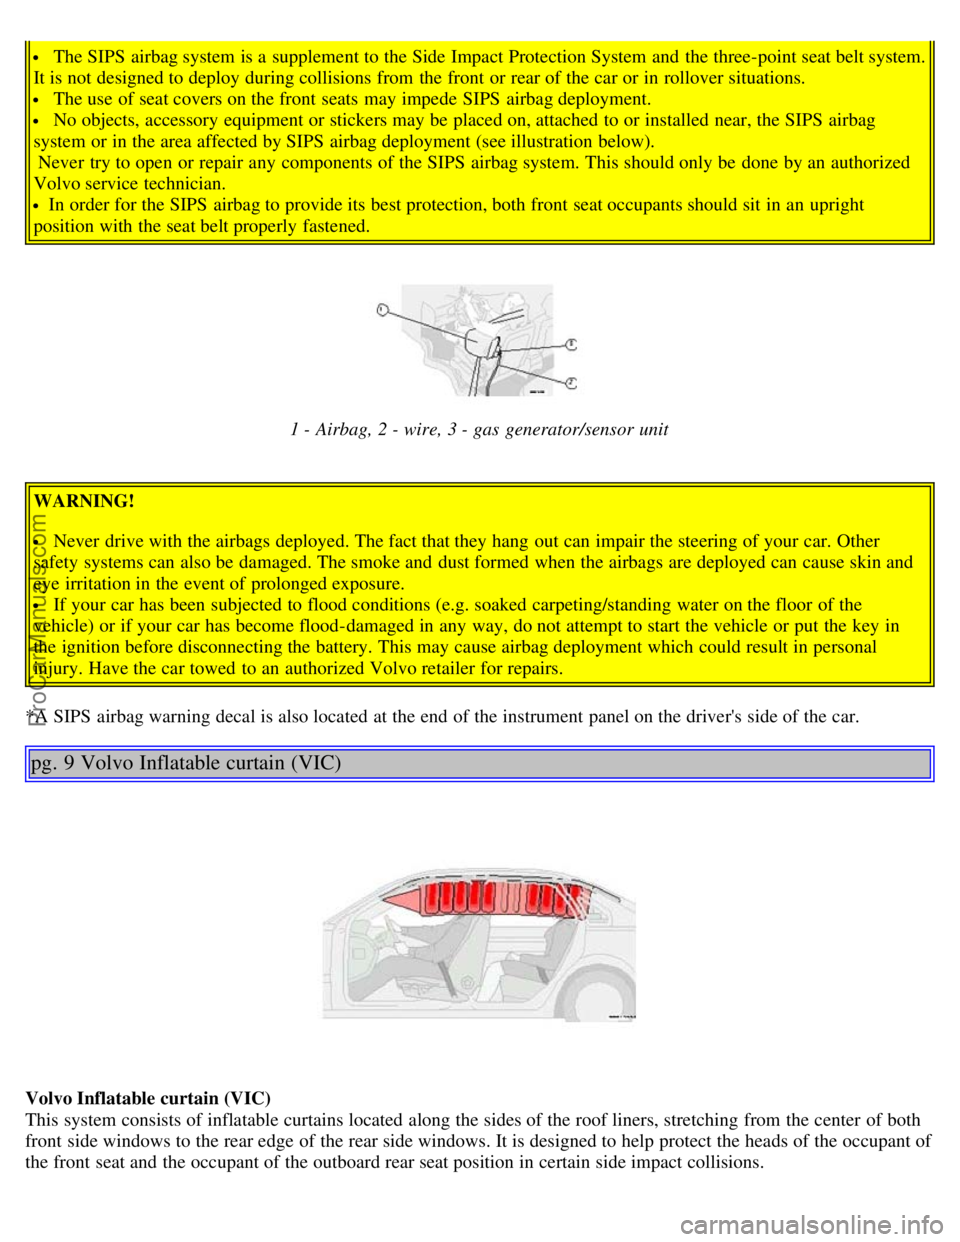 VOLVO S80 2003  Owners Manual  The SIPS  airbag system is a  supplement to the Side Impact Protection System  and  the three-point seat belt system.
It is not designed to deploy during collisions from  the front  or rear of the ca